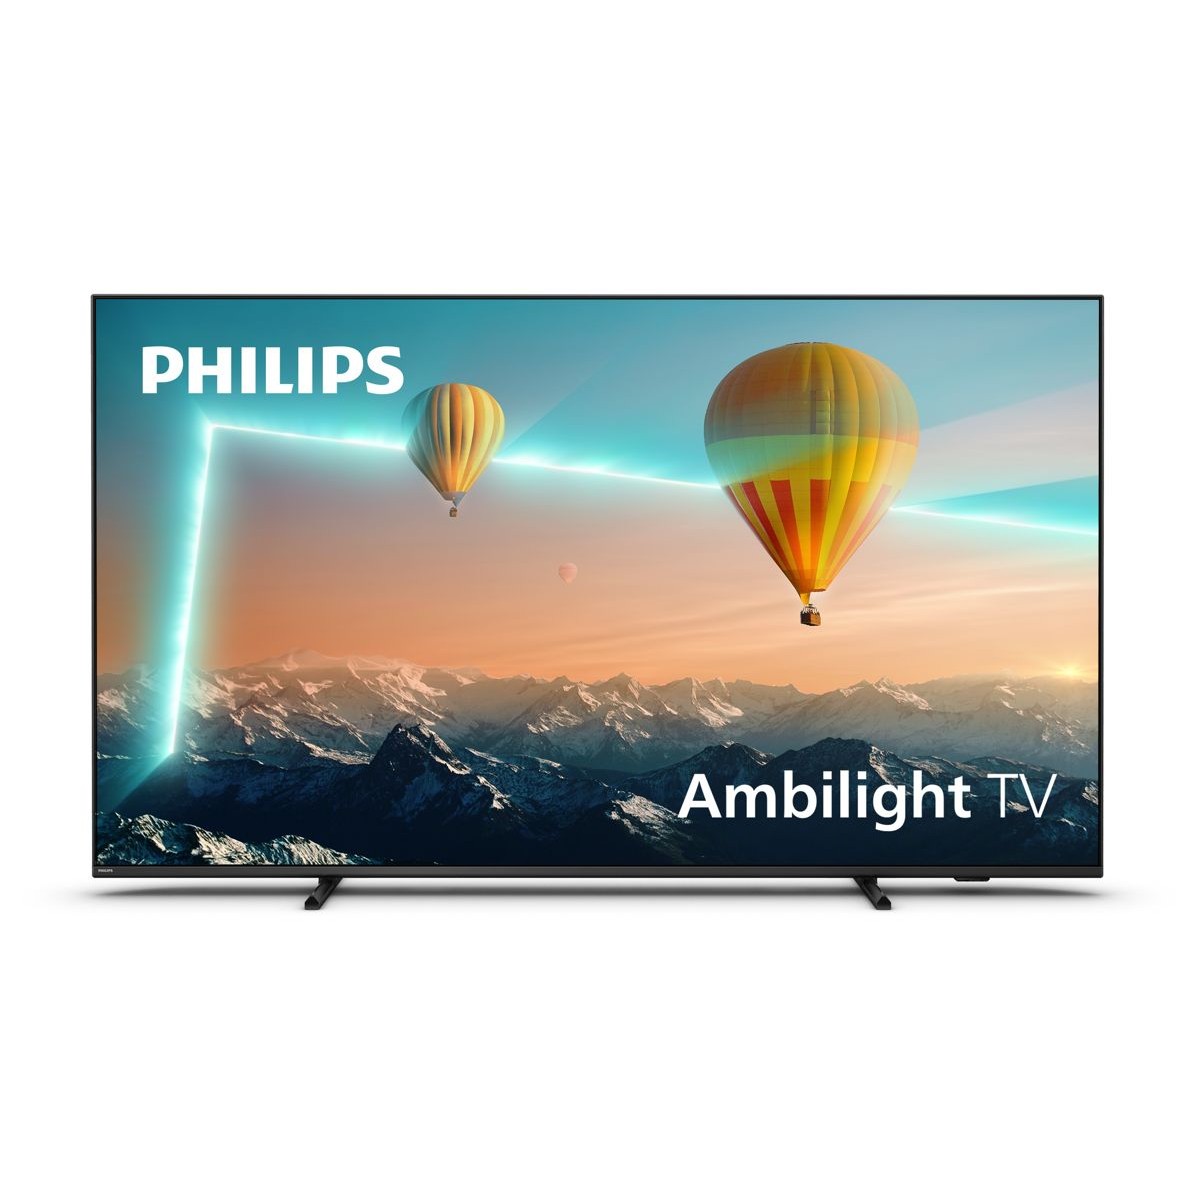 PHILIPS TV 70PUS8007/12 70" LED UHD Ambilight Android